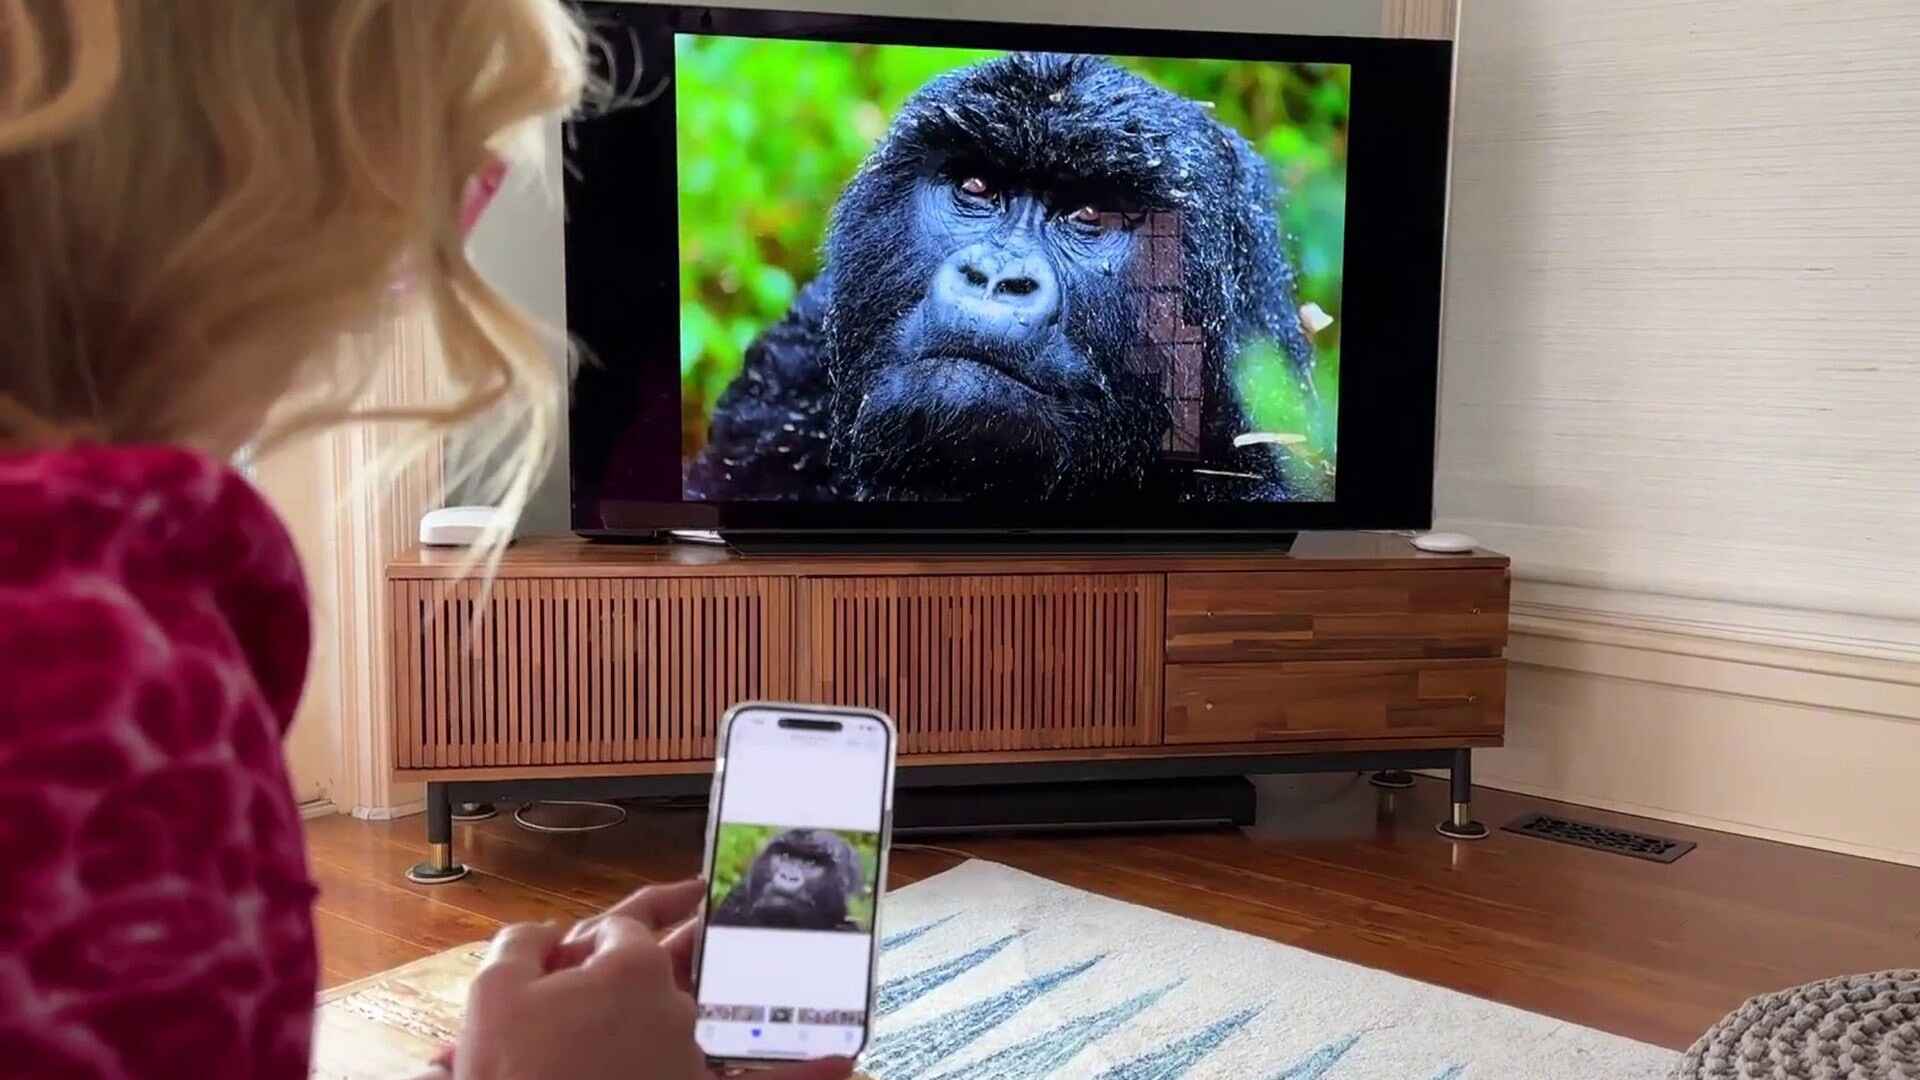 How To Mirror IPhone To Smart TV Without Wi-Fi